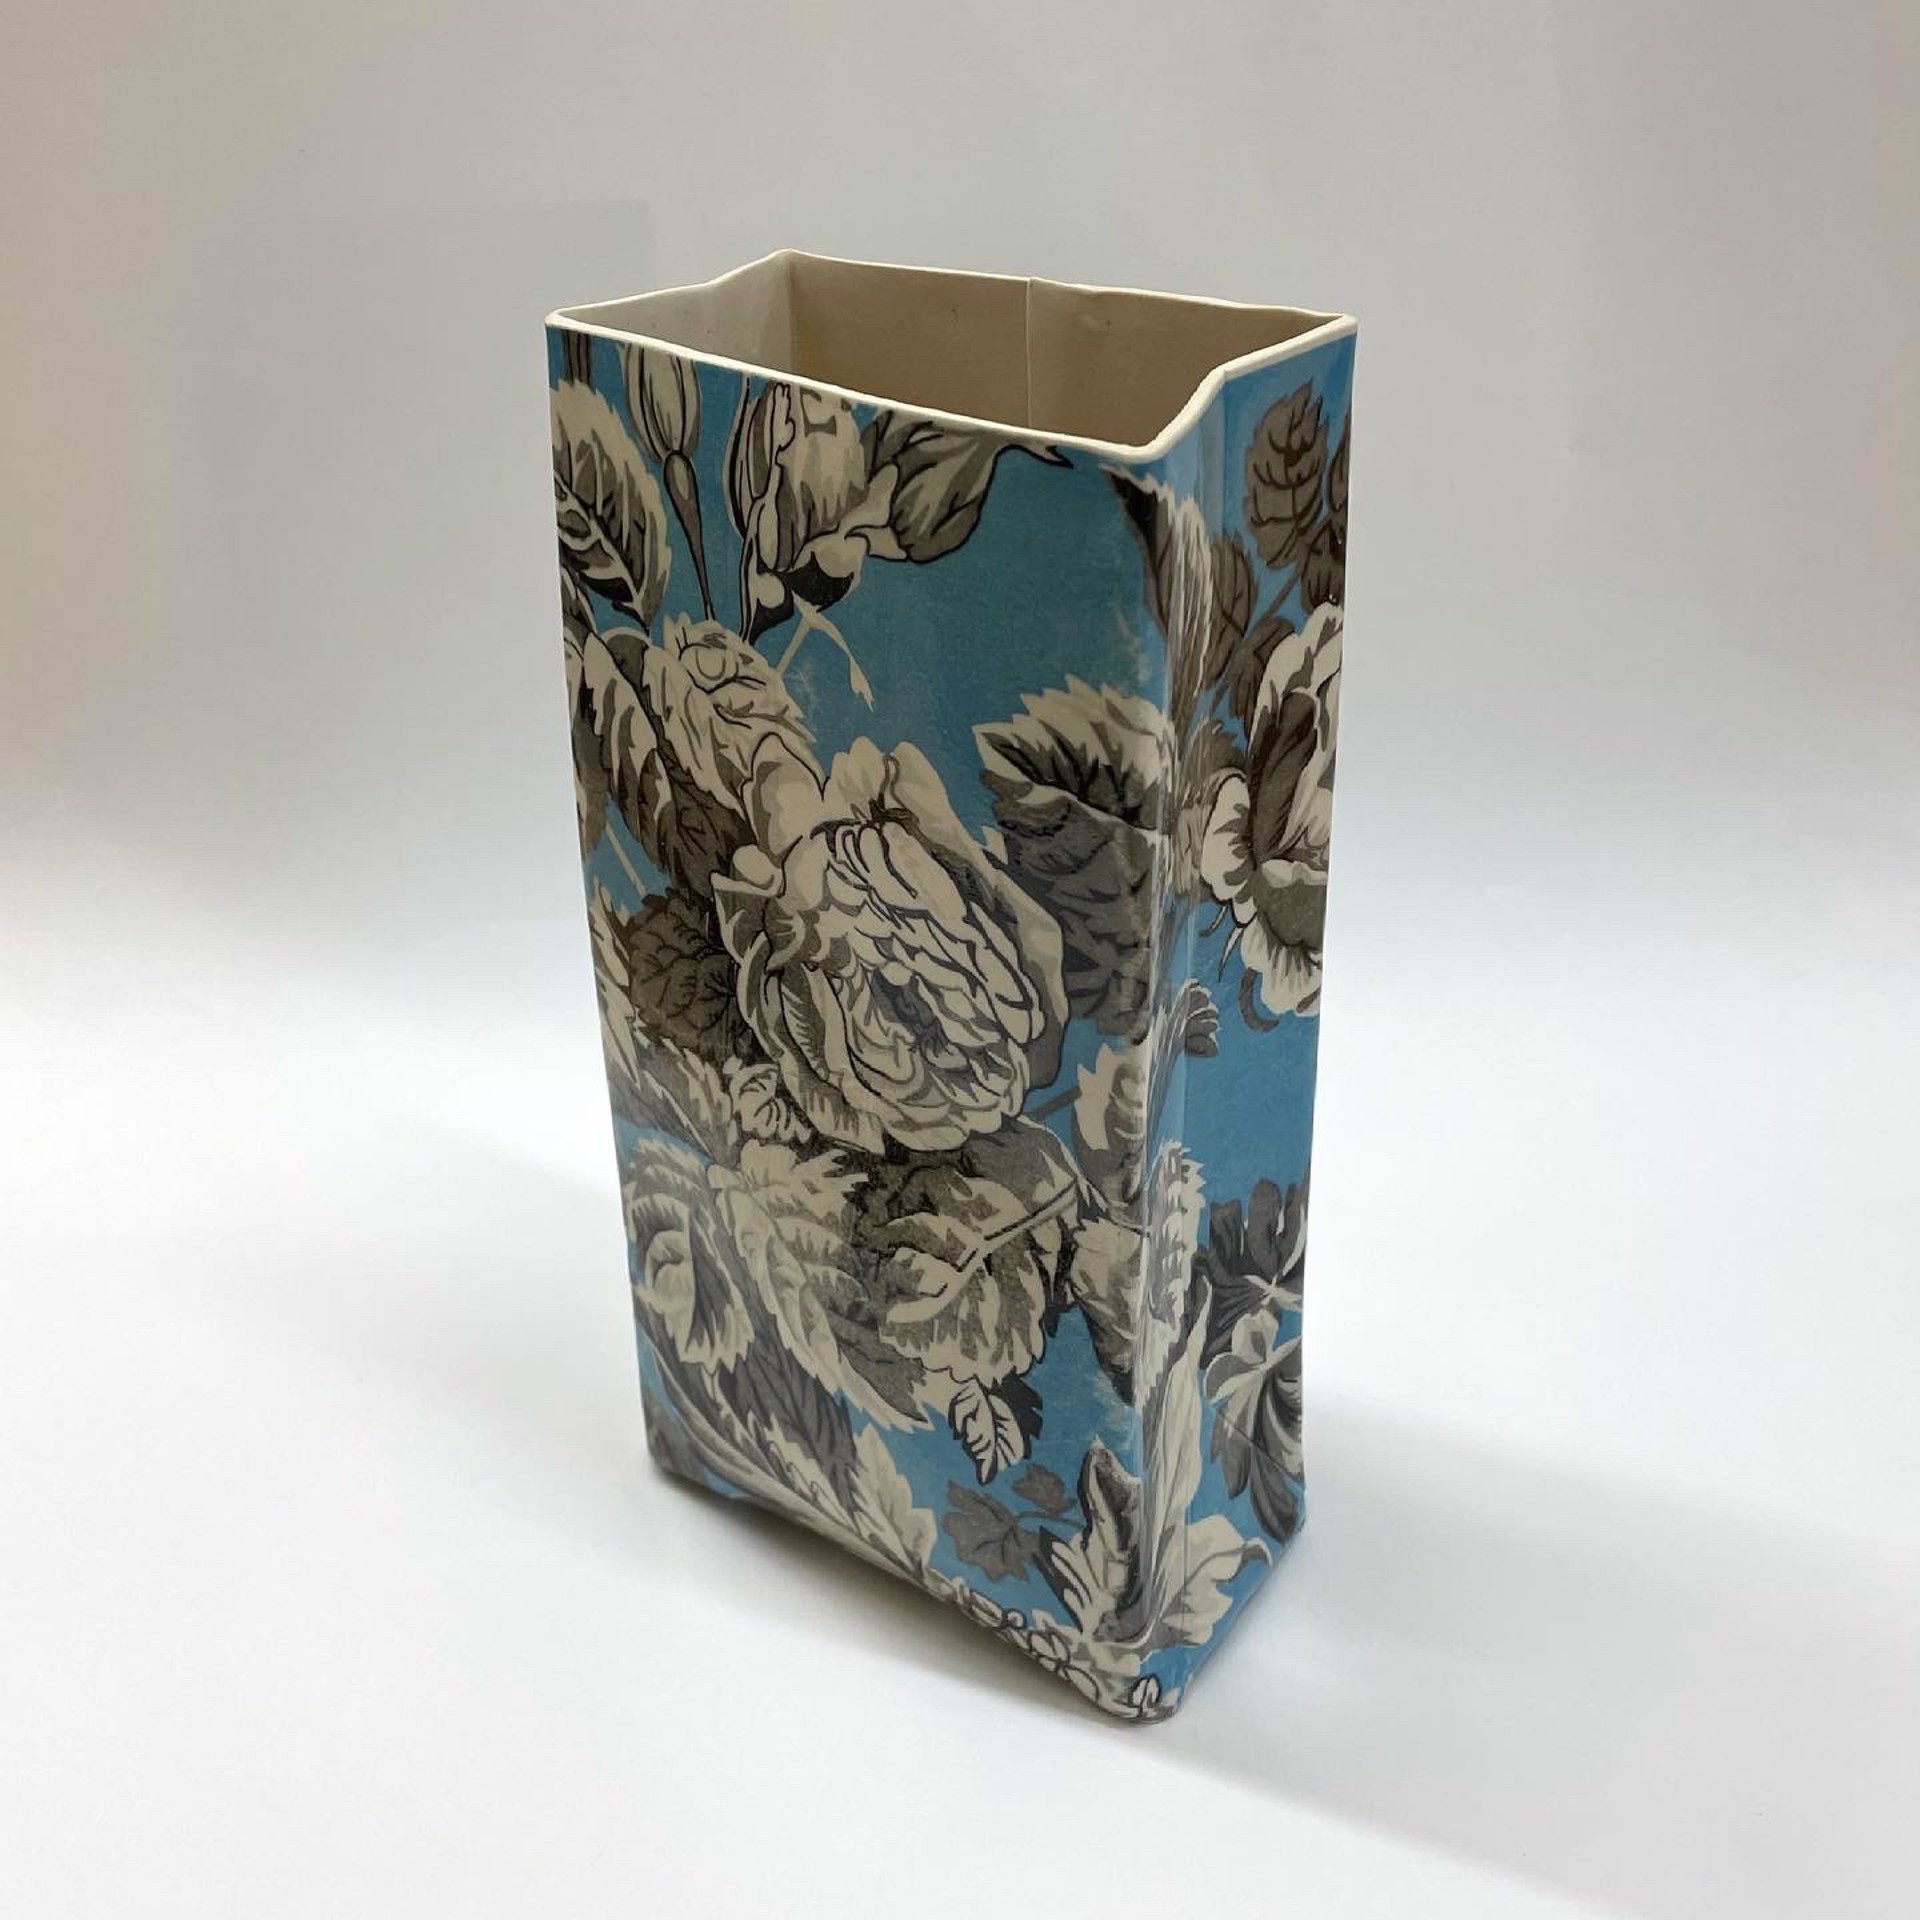 Bag with Blue Flowers by Chandra Beadleston